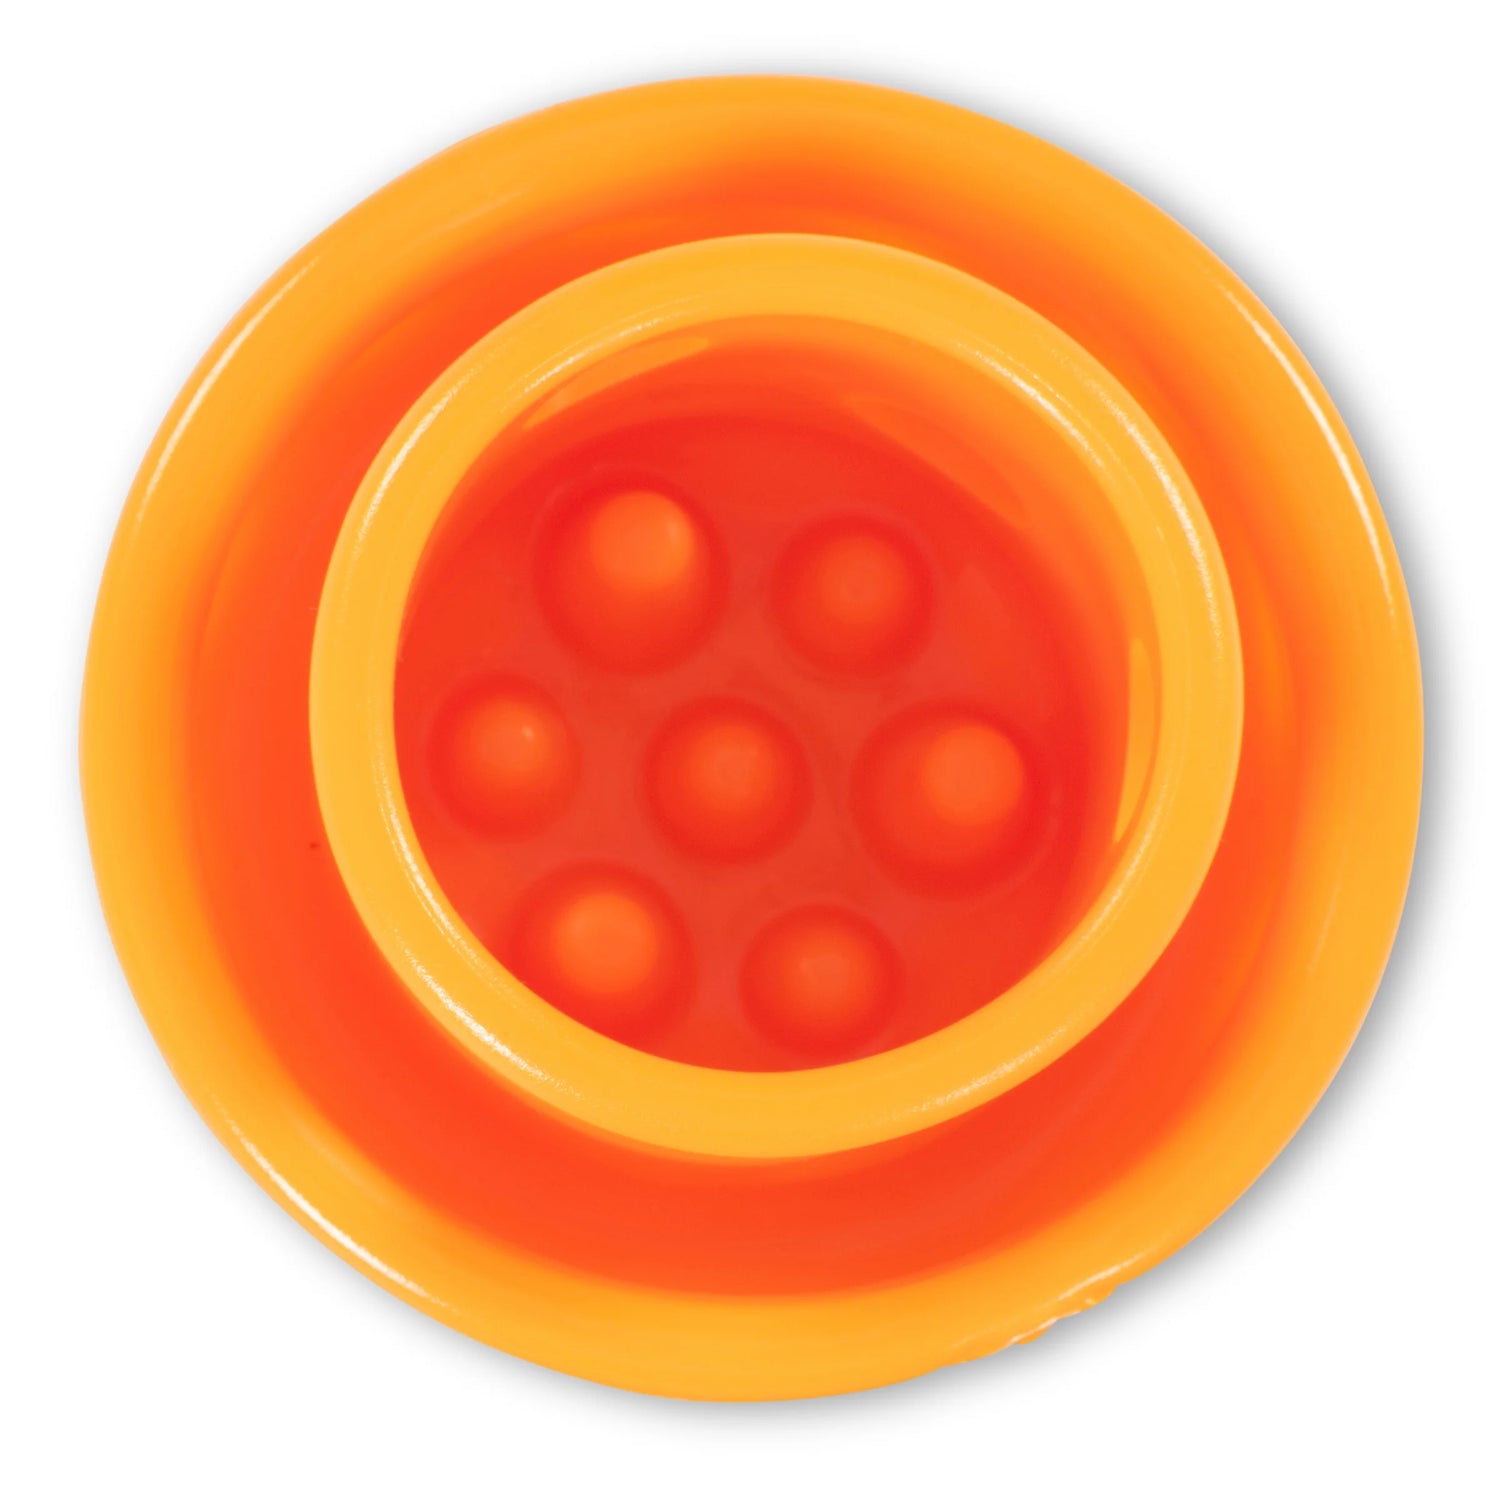 Mini orange mushroom dog toy with internal designs to hold food for play and enrichment.